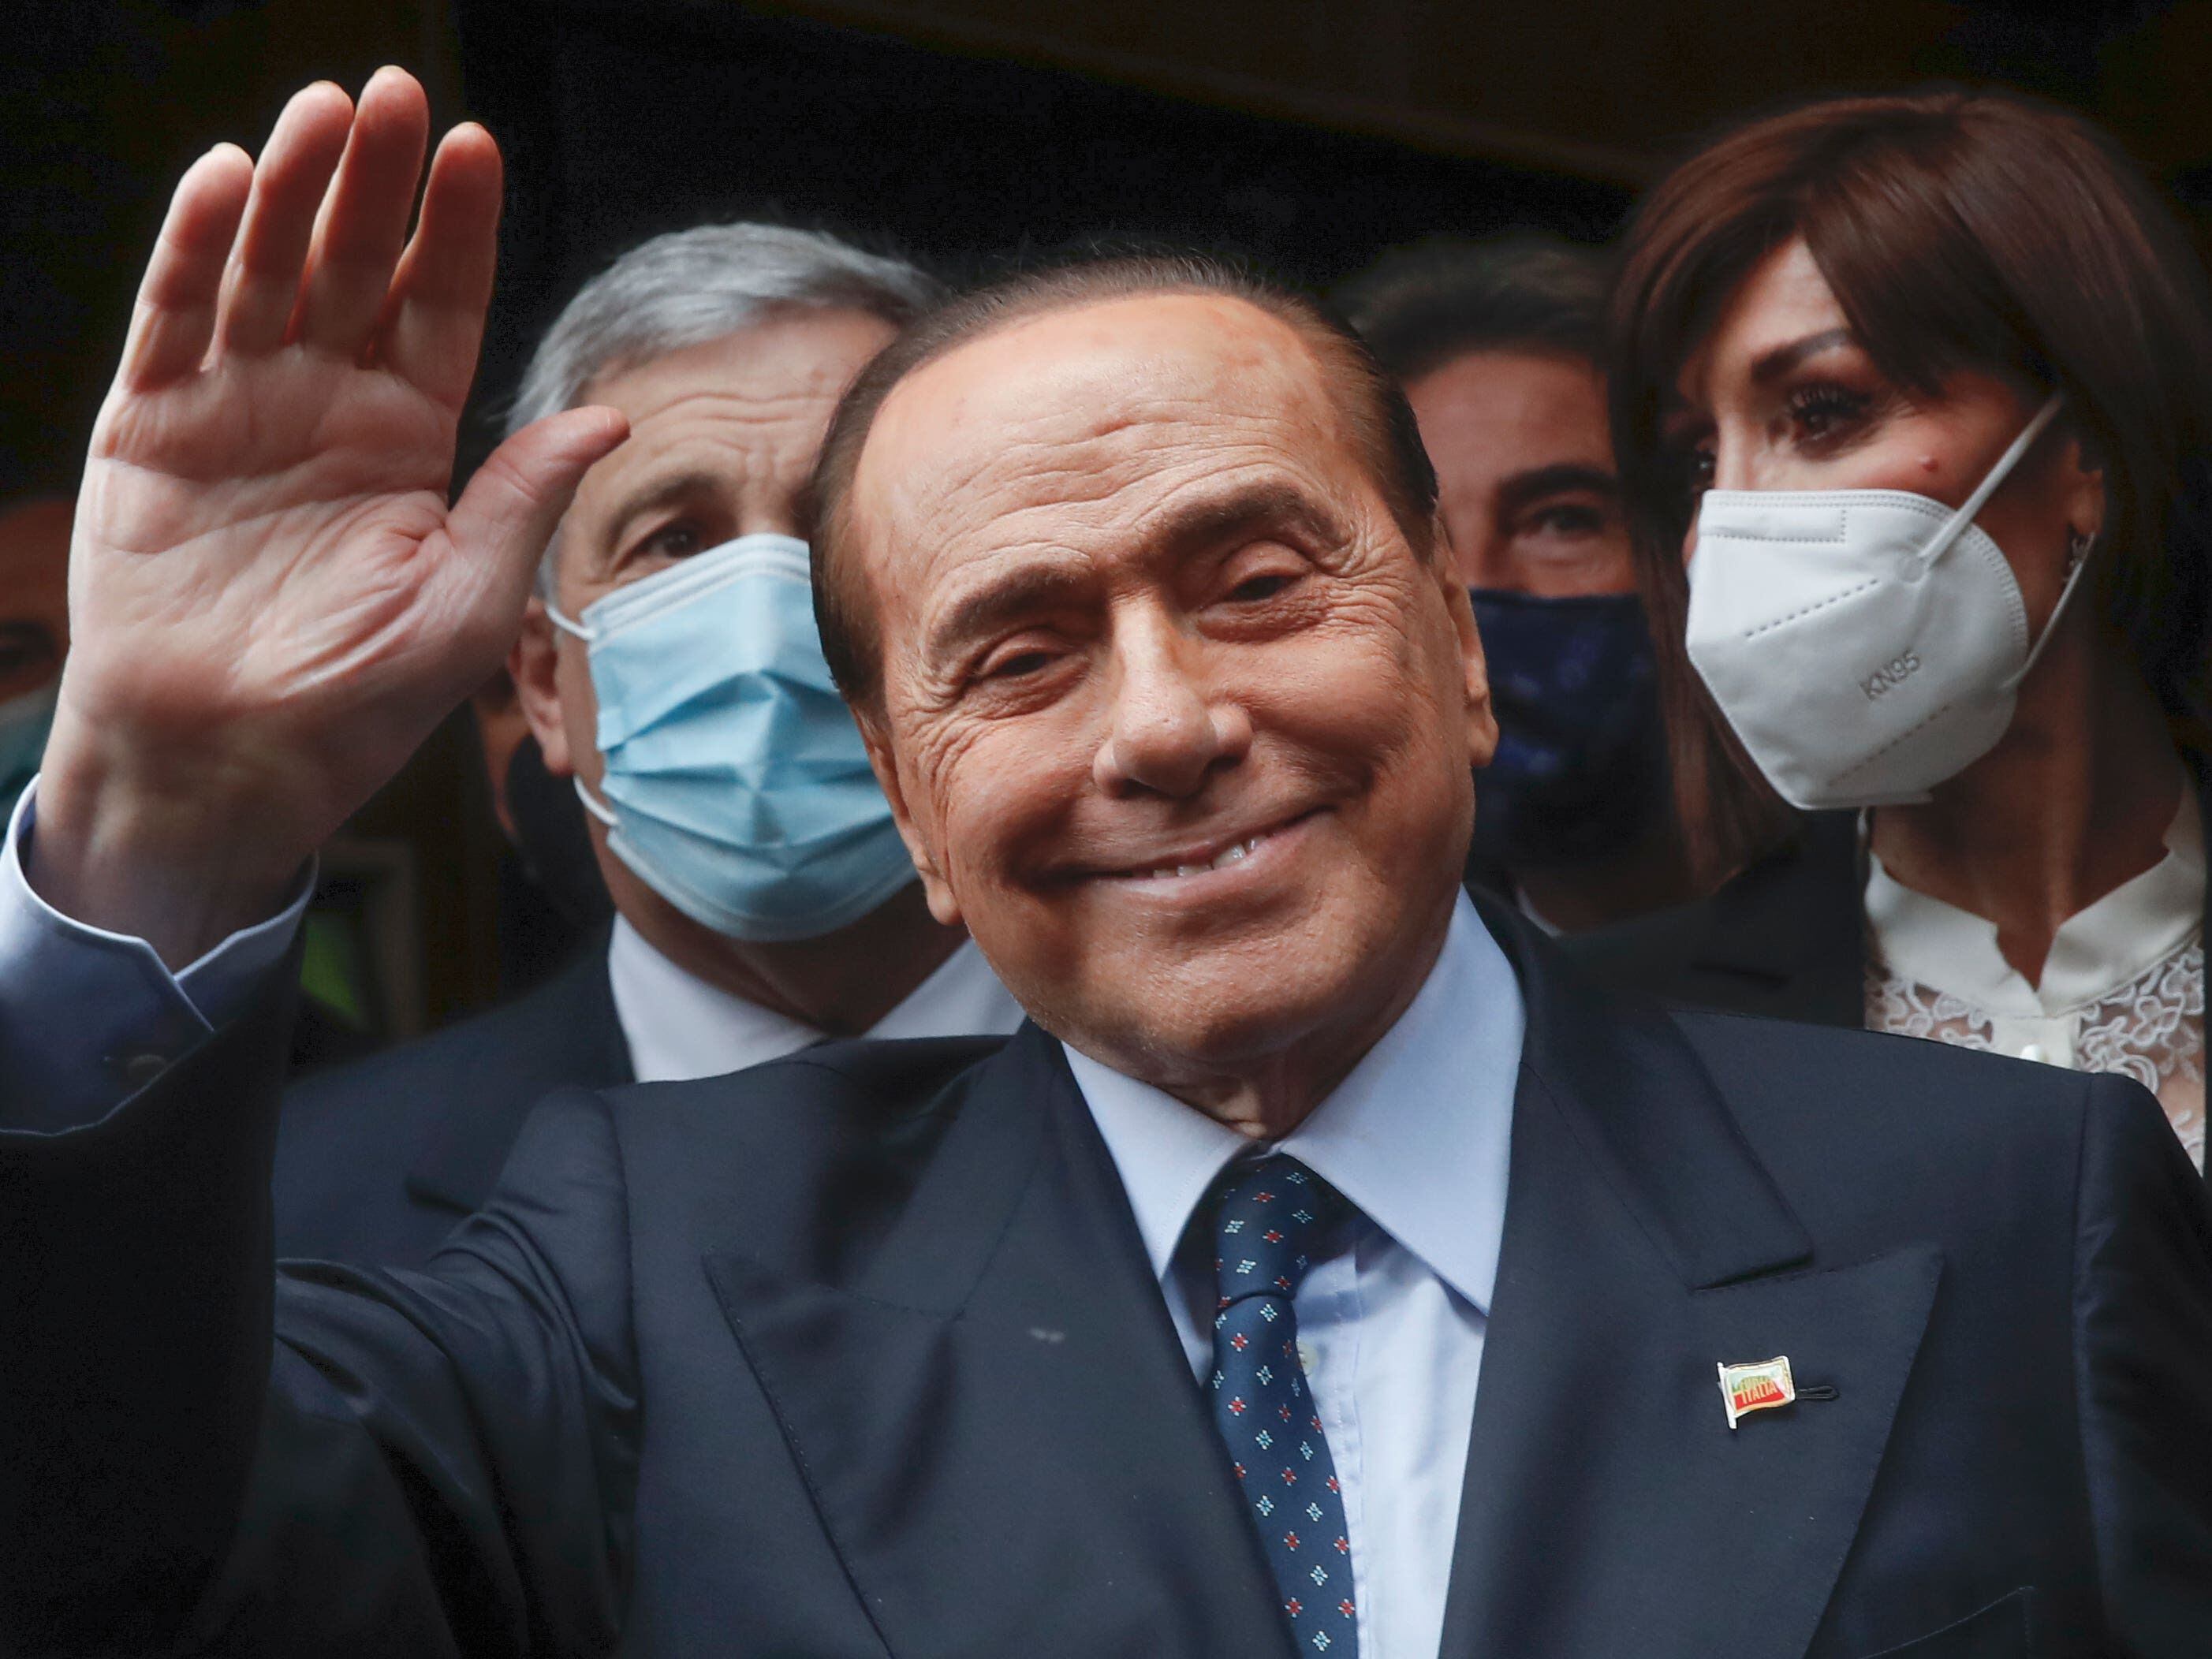 Milan’s Malpensa airport is to be named after Silvio Berlusconi